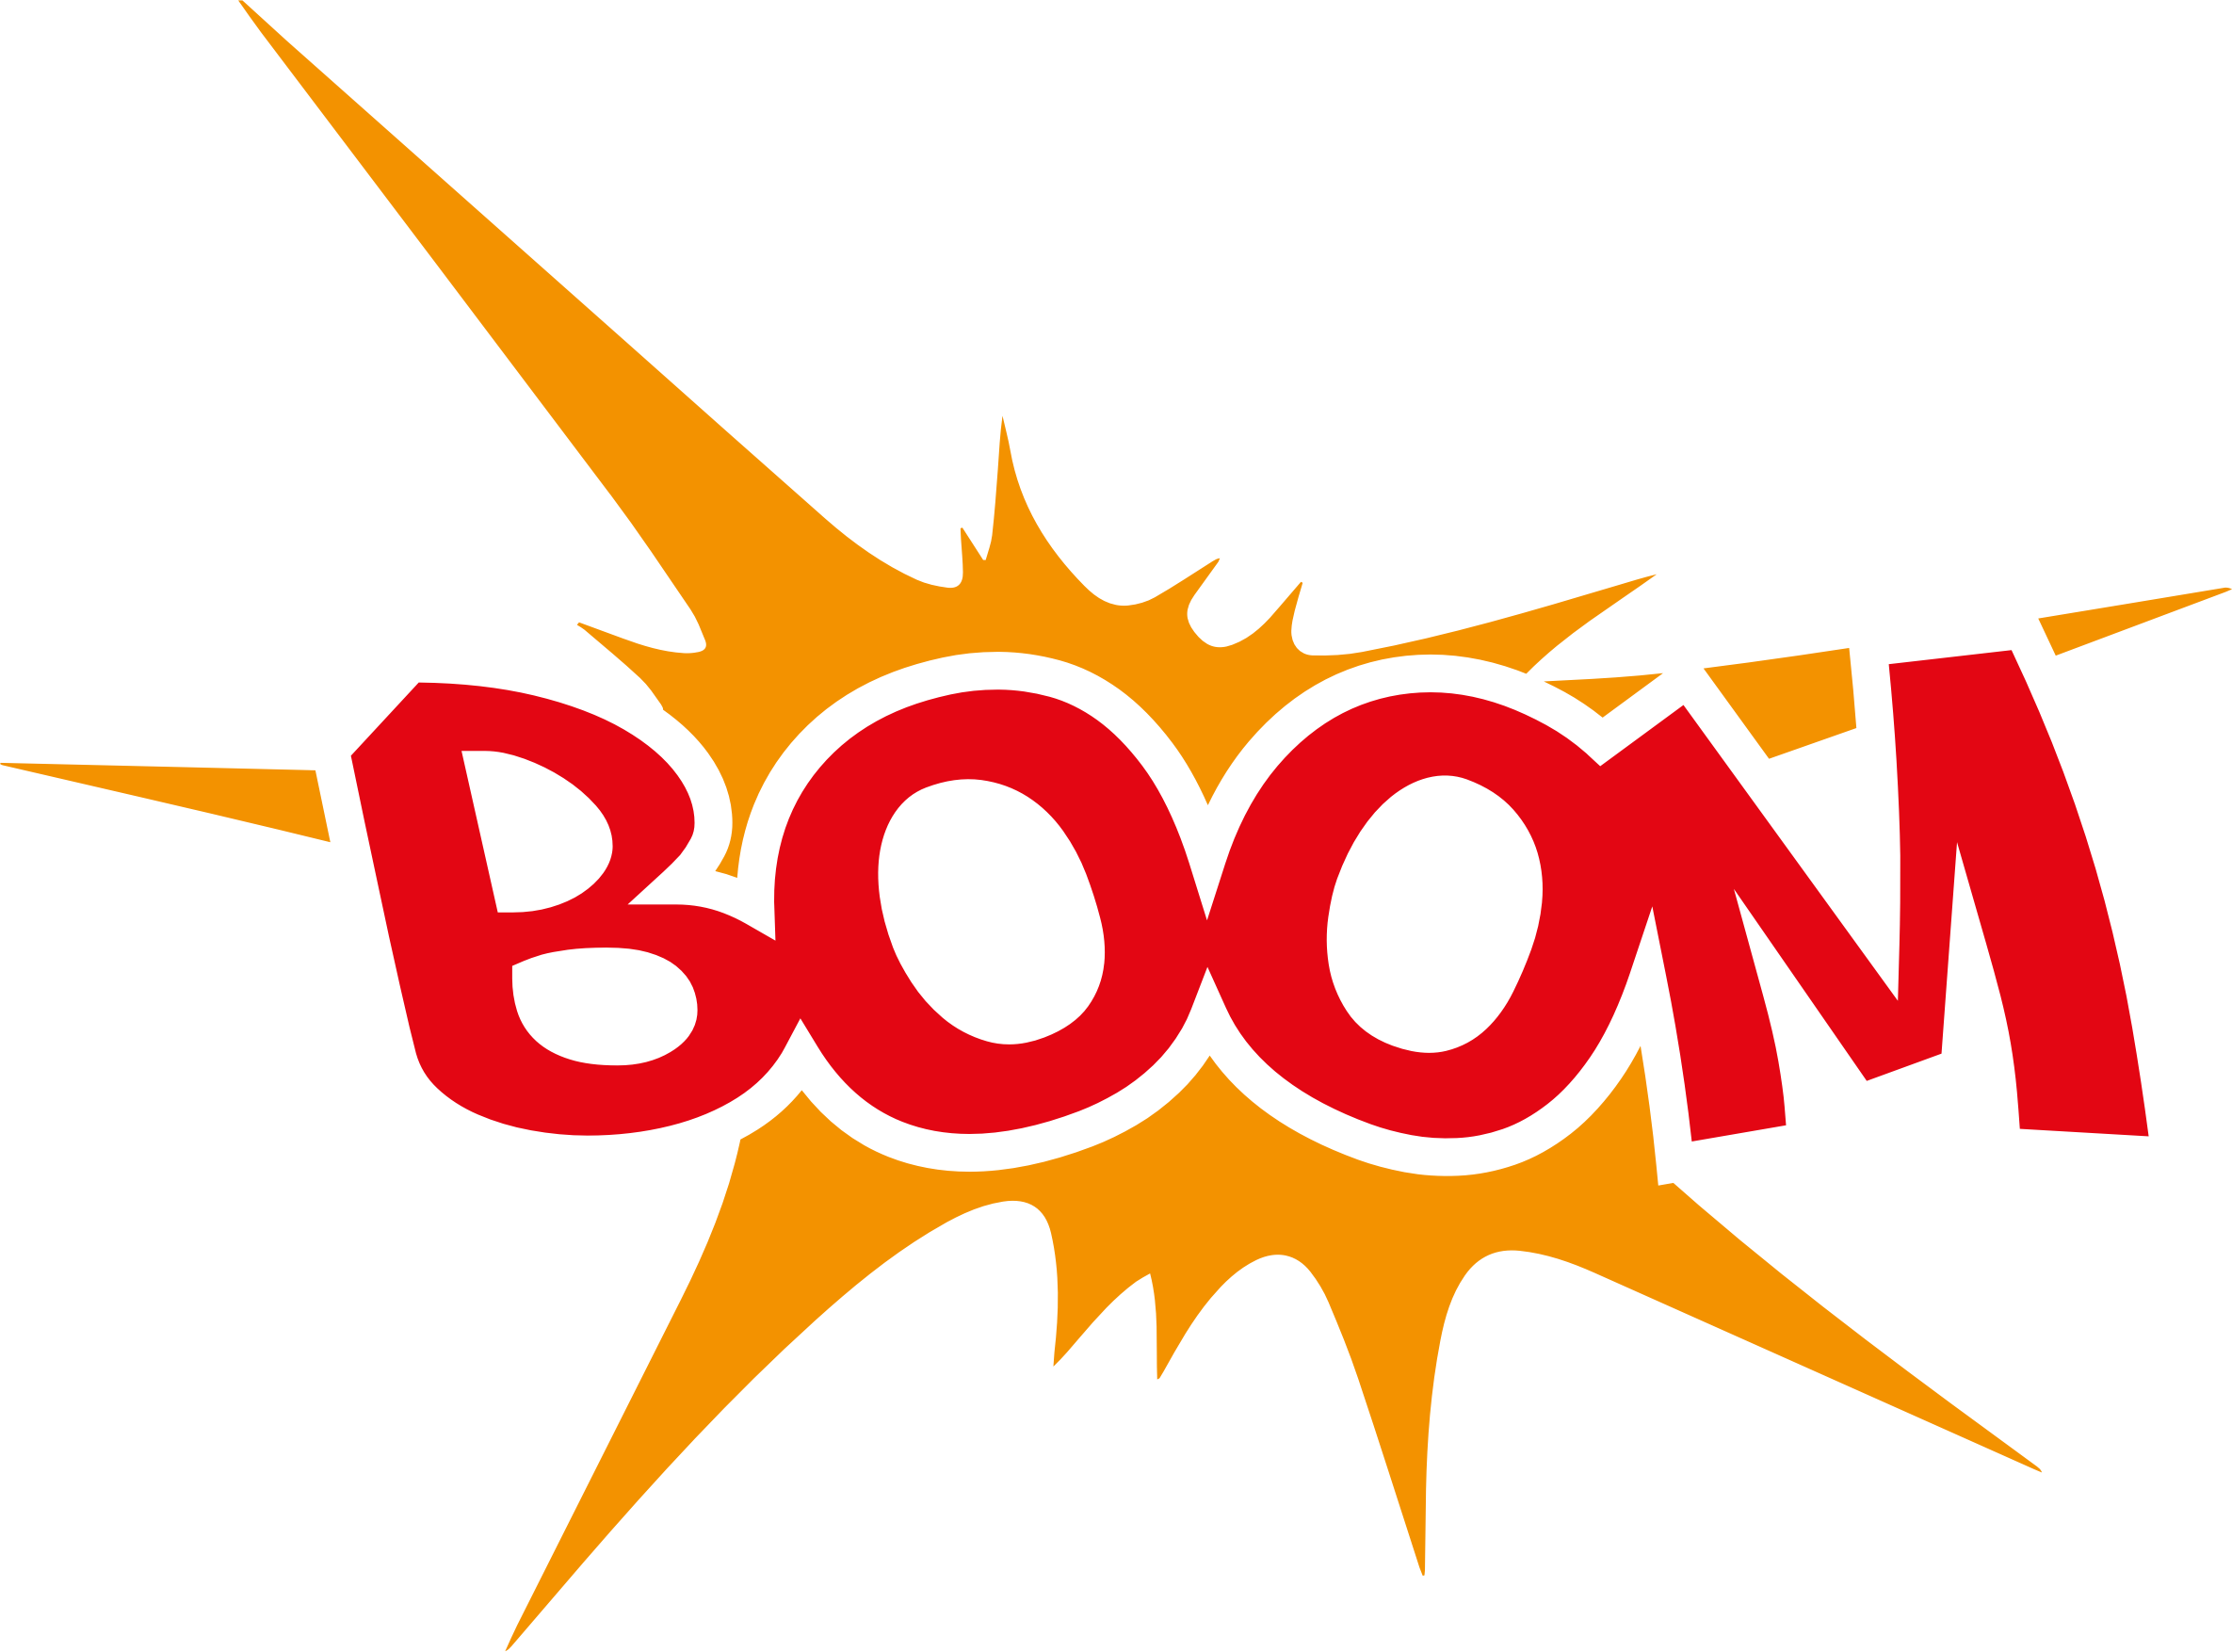 clipart explosion kaboom